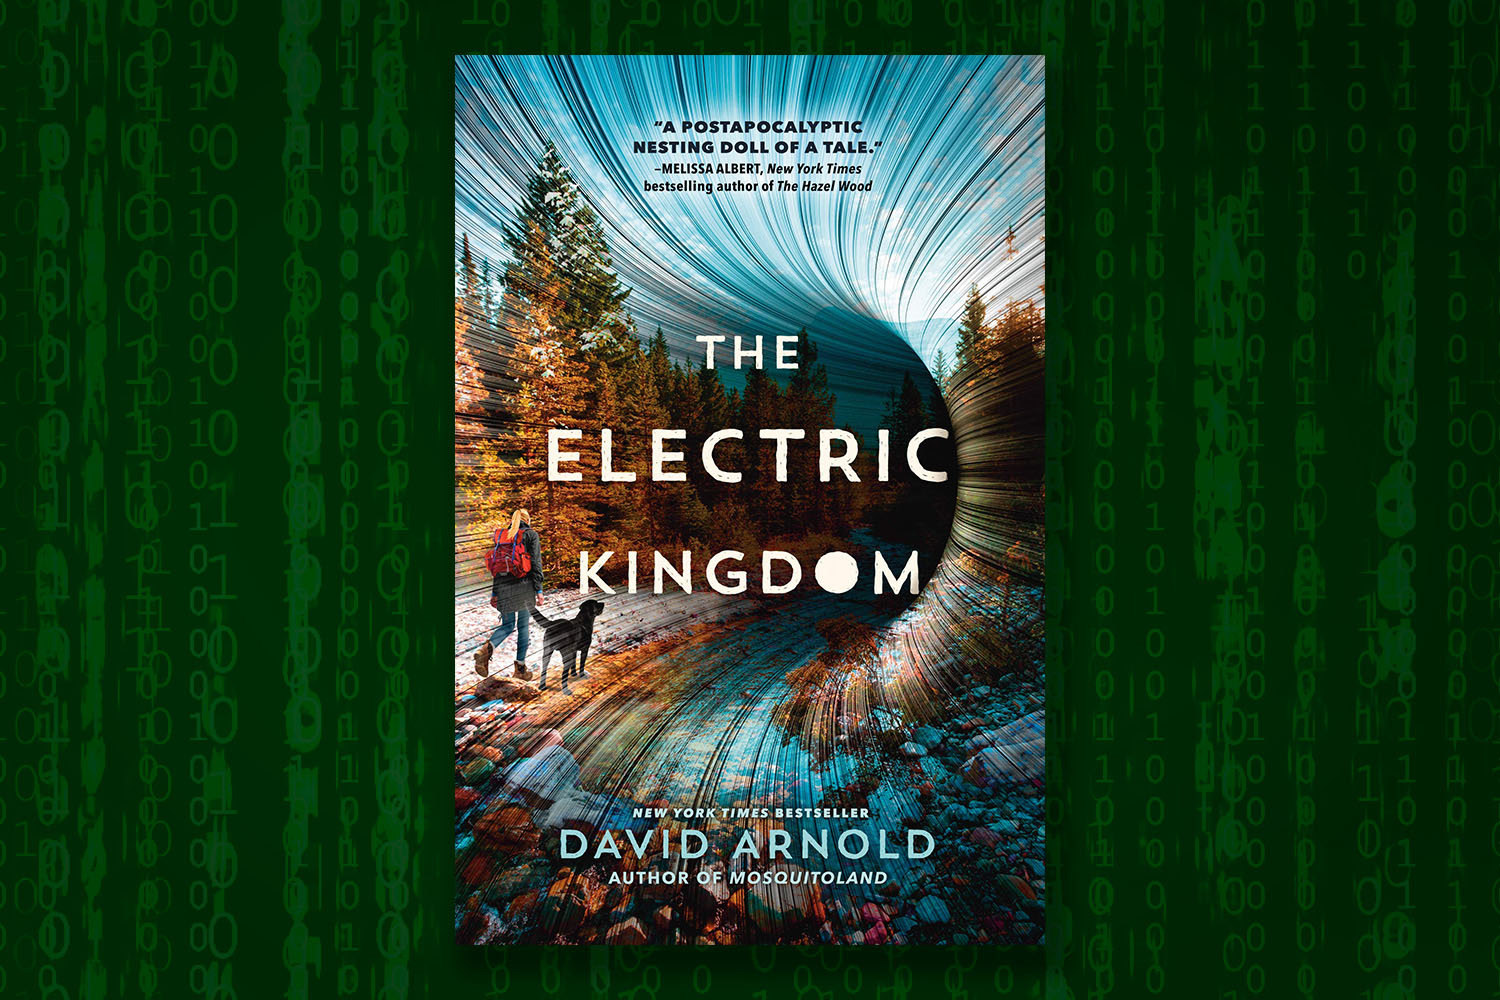 The Electric Kingdom Book on background